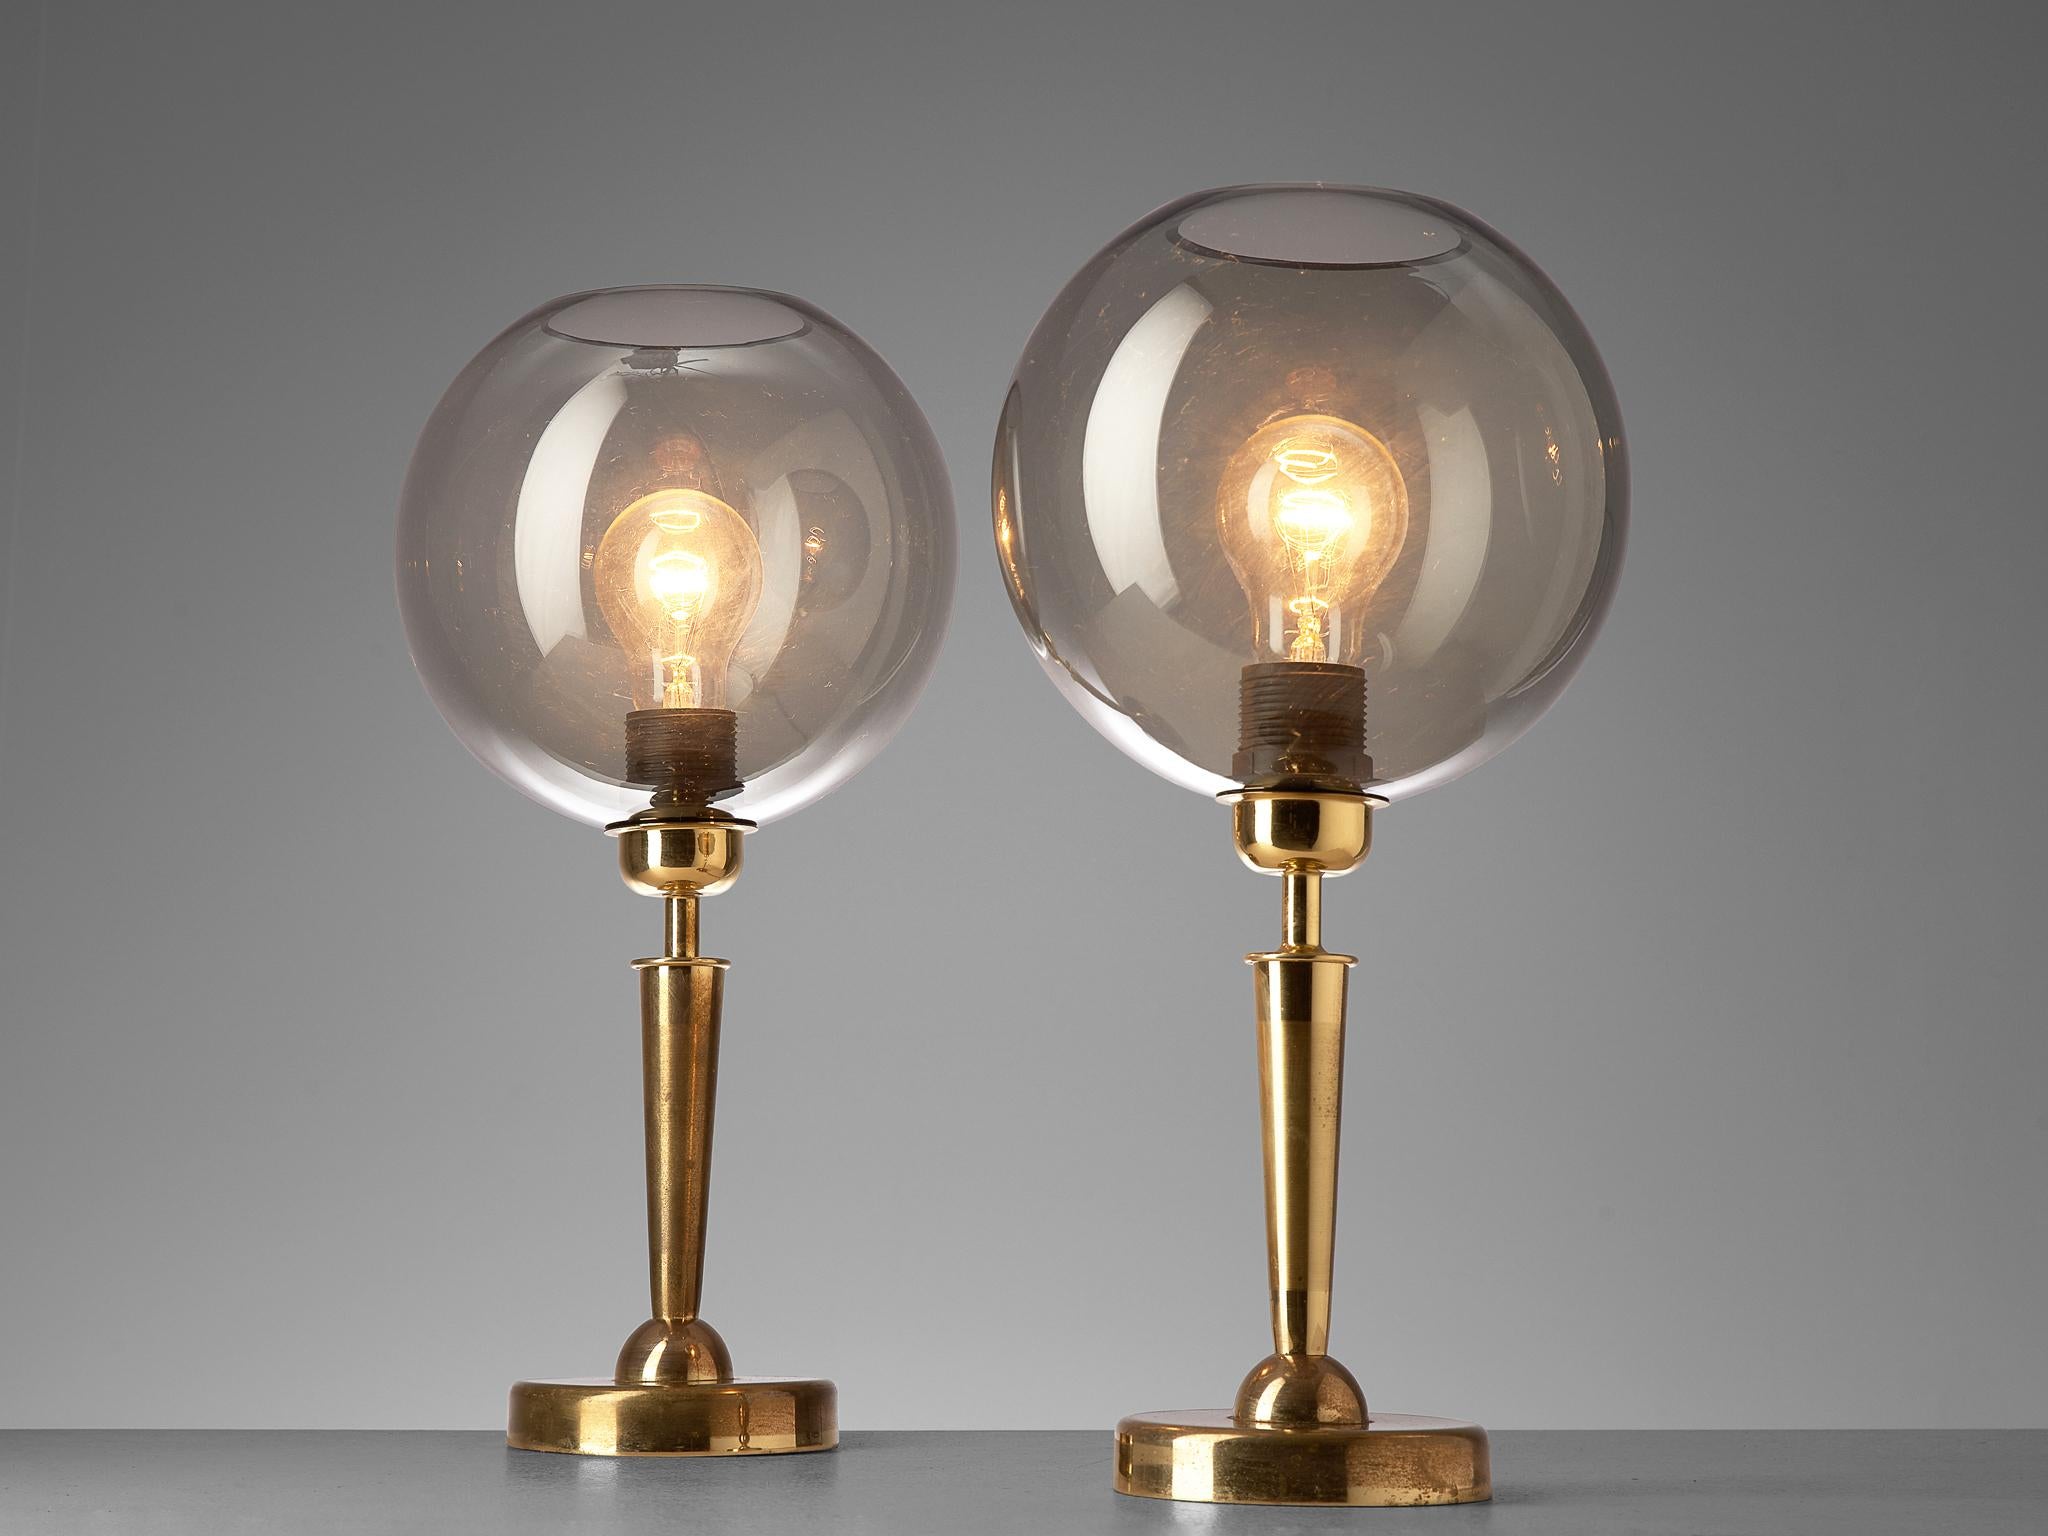 Table lamps, brass and glass, France, 1970s

Elegant table light composed of brass and mounted with a spherical shade in smoked glass. The table lights are manufactured in France during the 1970s. Please note we have a large amount available of